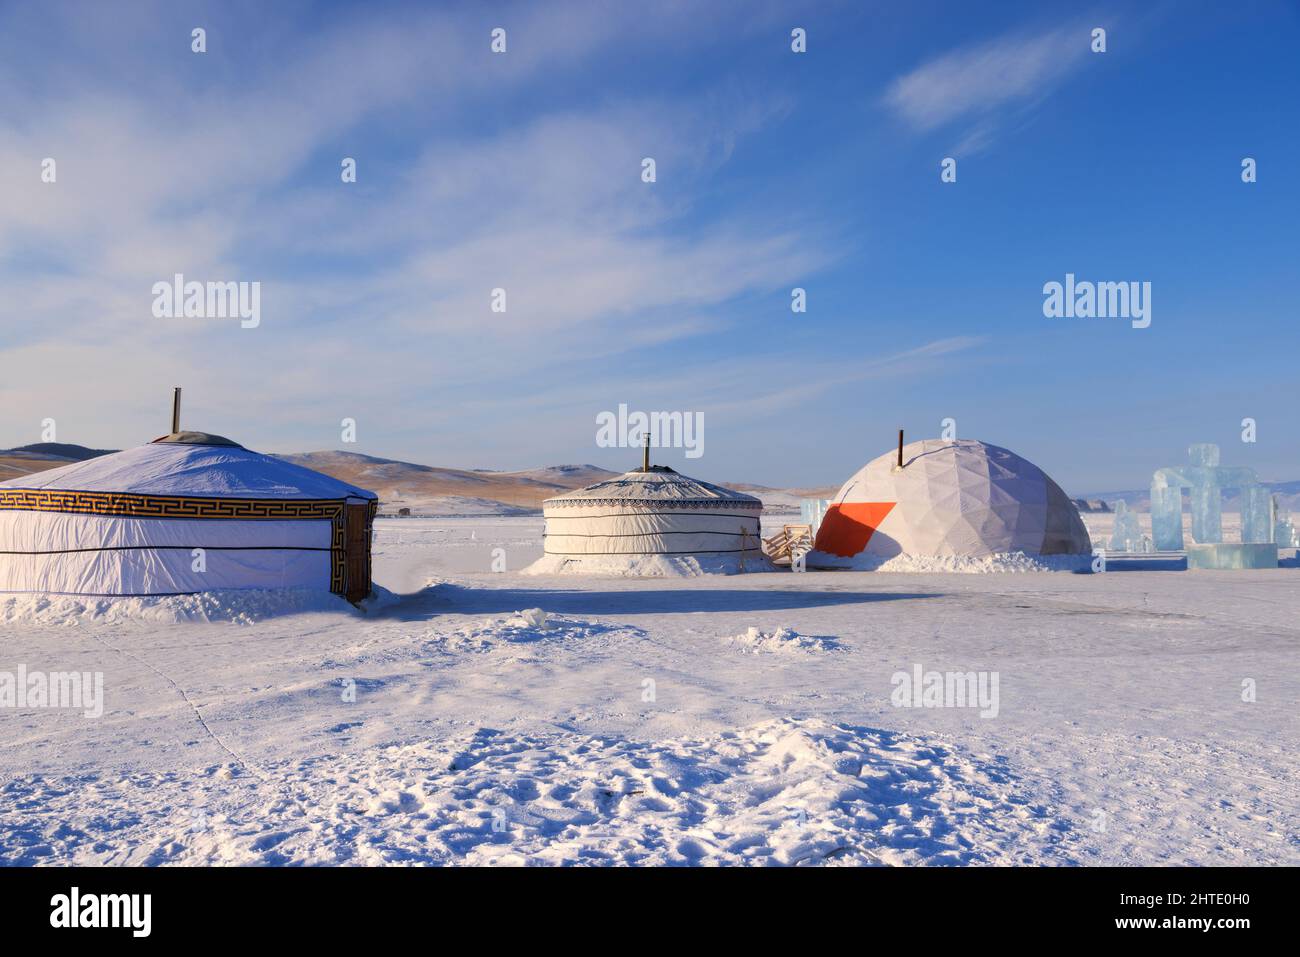 Mongolian traditional yurt in a snowy desert with mountains in the background Stock Photo